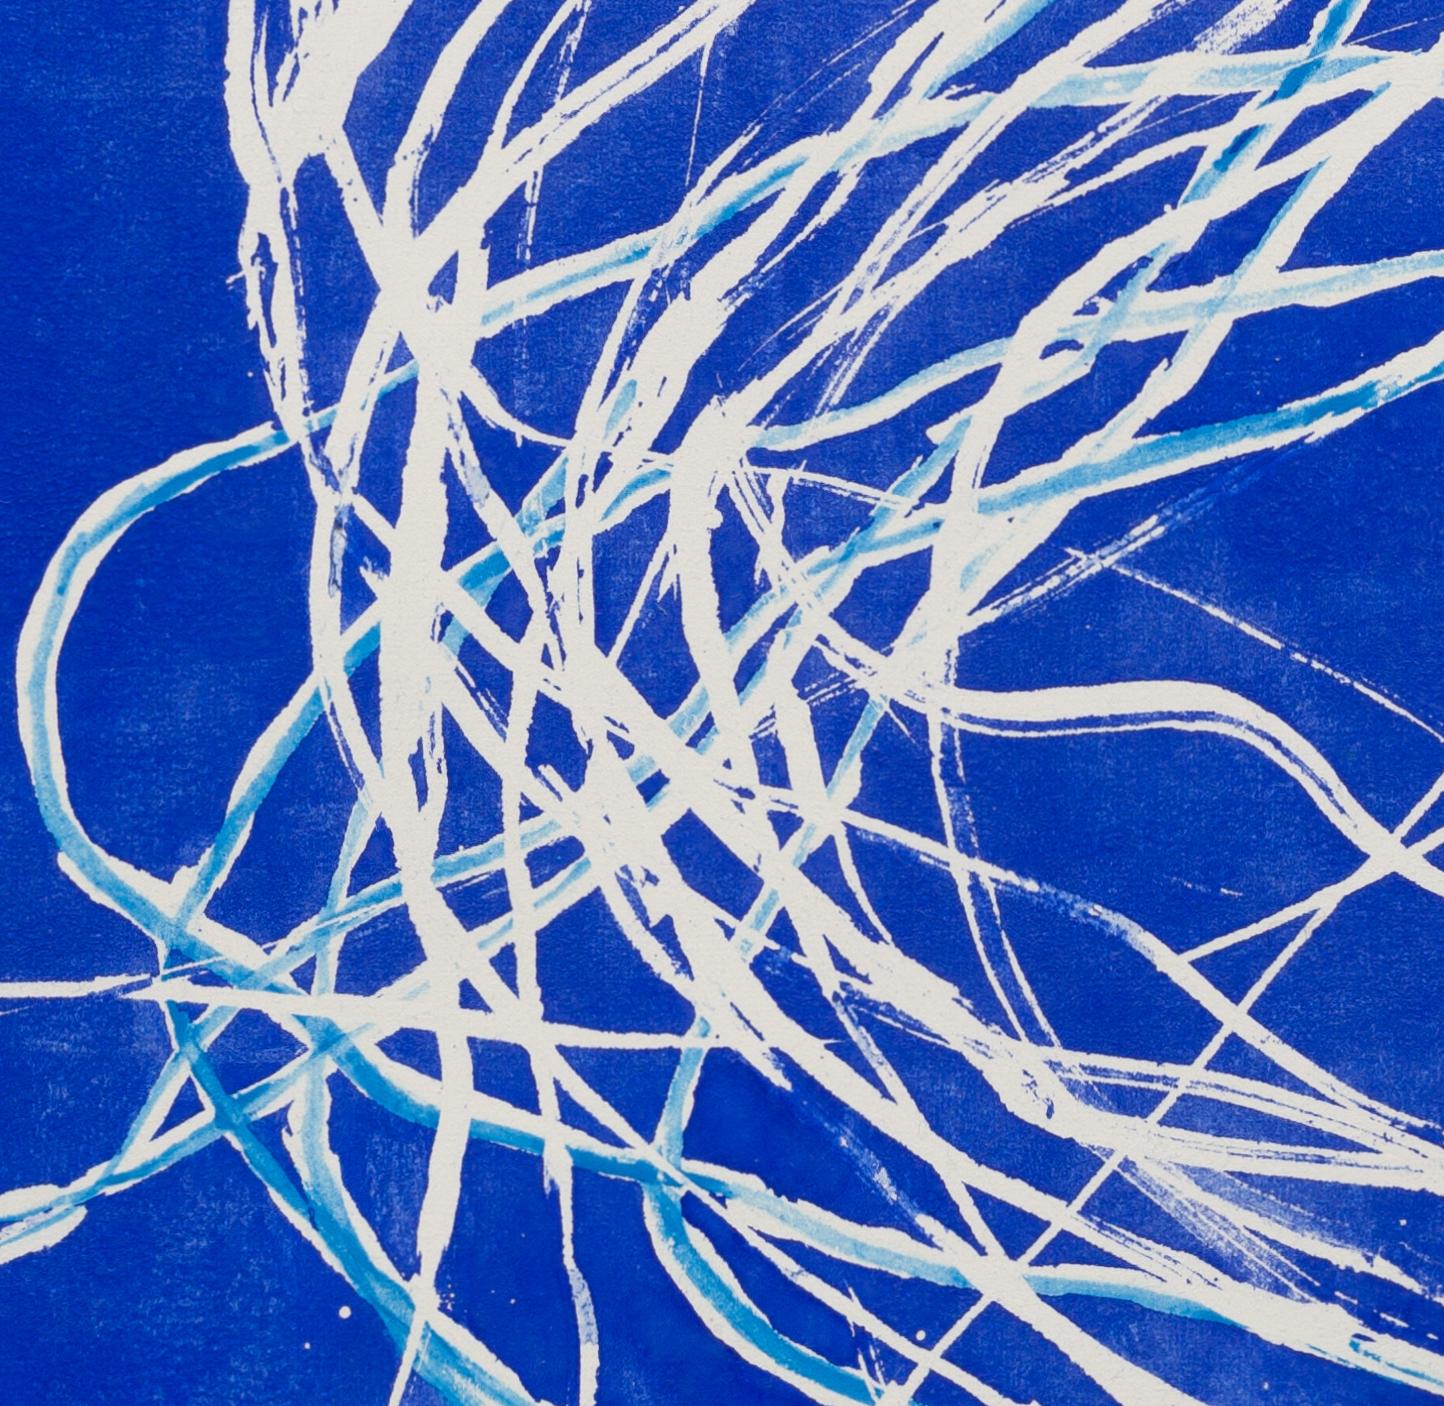 Reef Dancer: contemporary abstract gestural sea painting on blue w/ white lines - Art by Paula Cahill